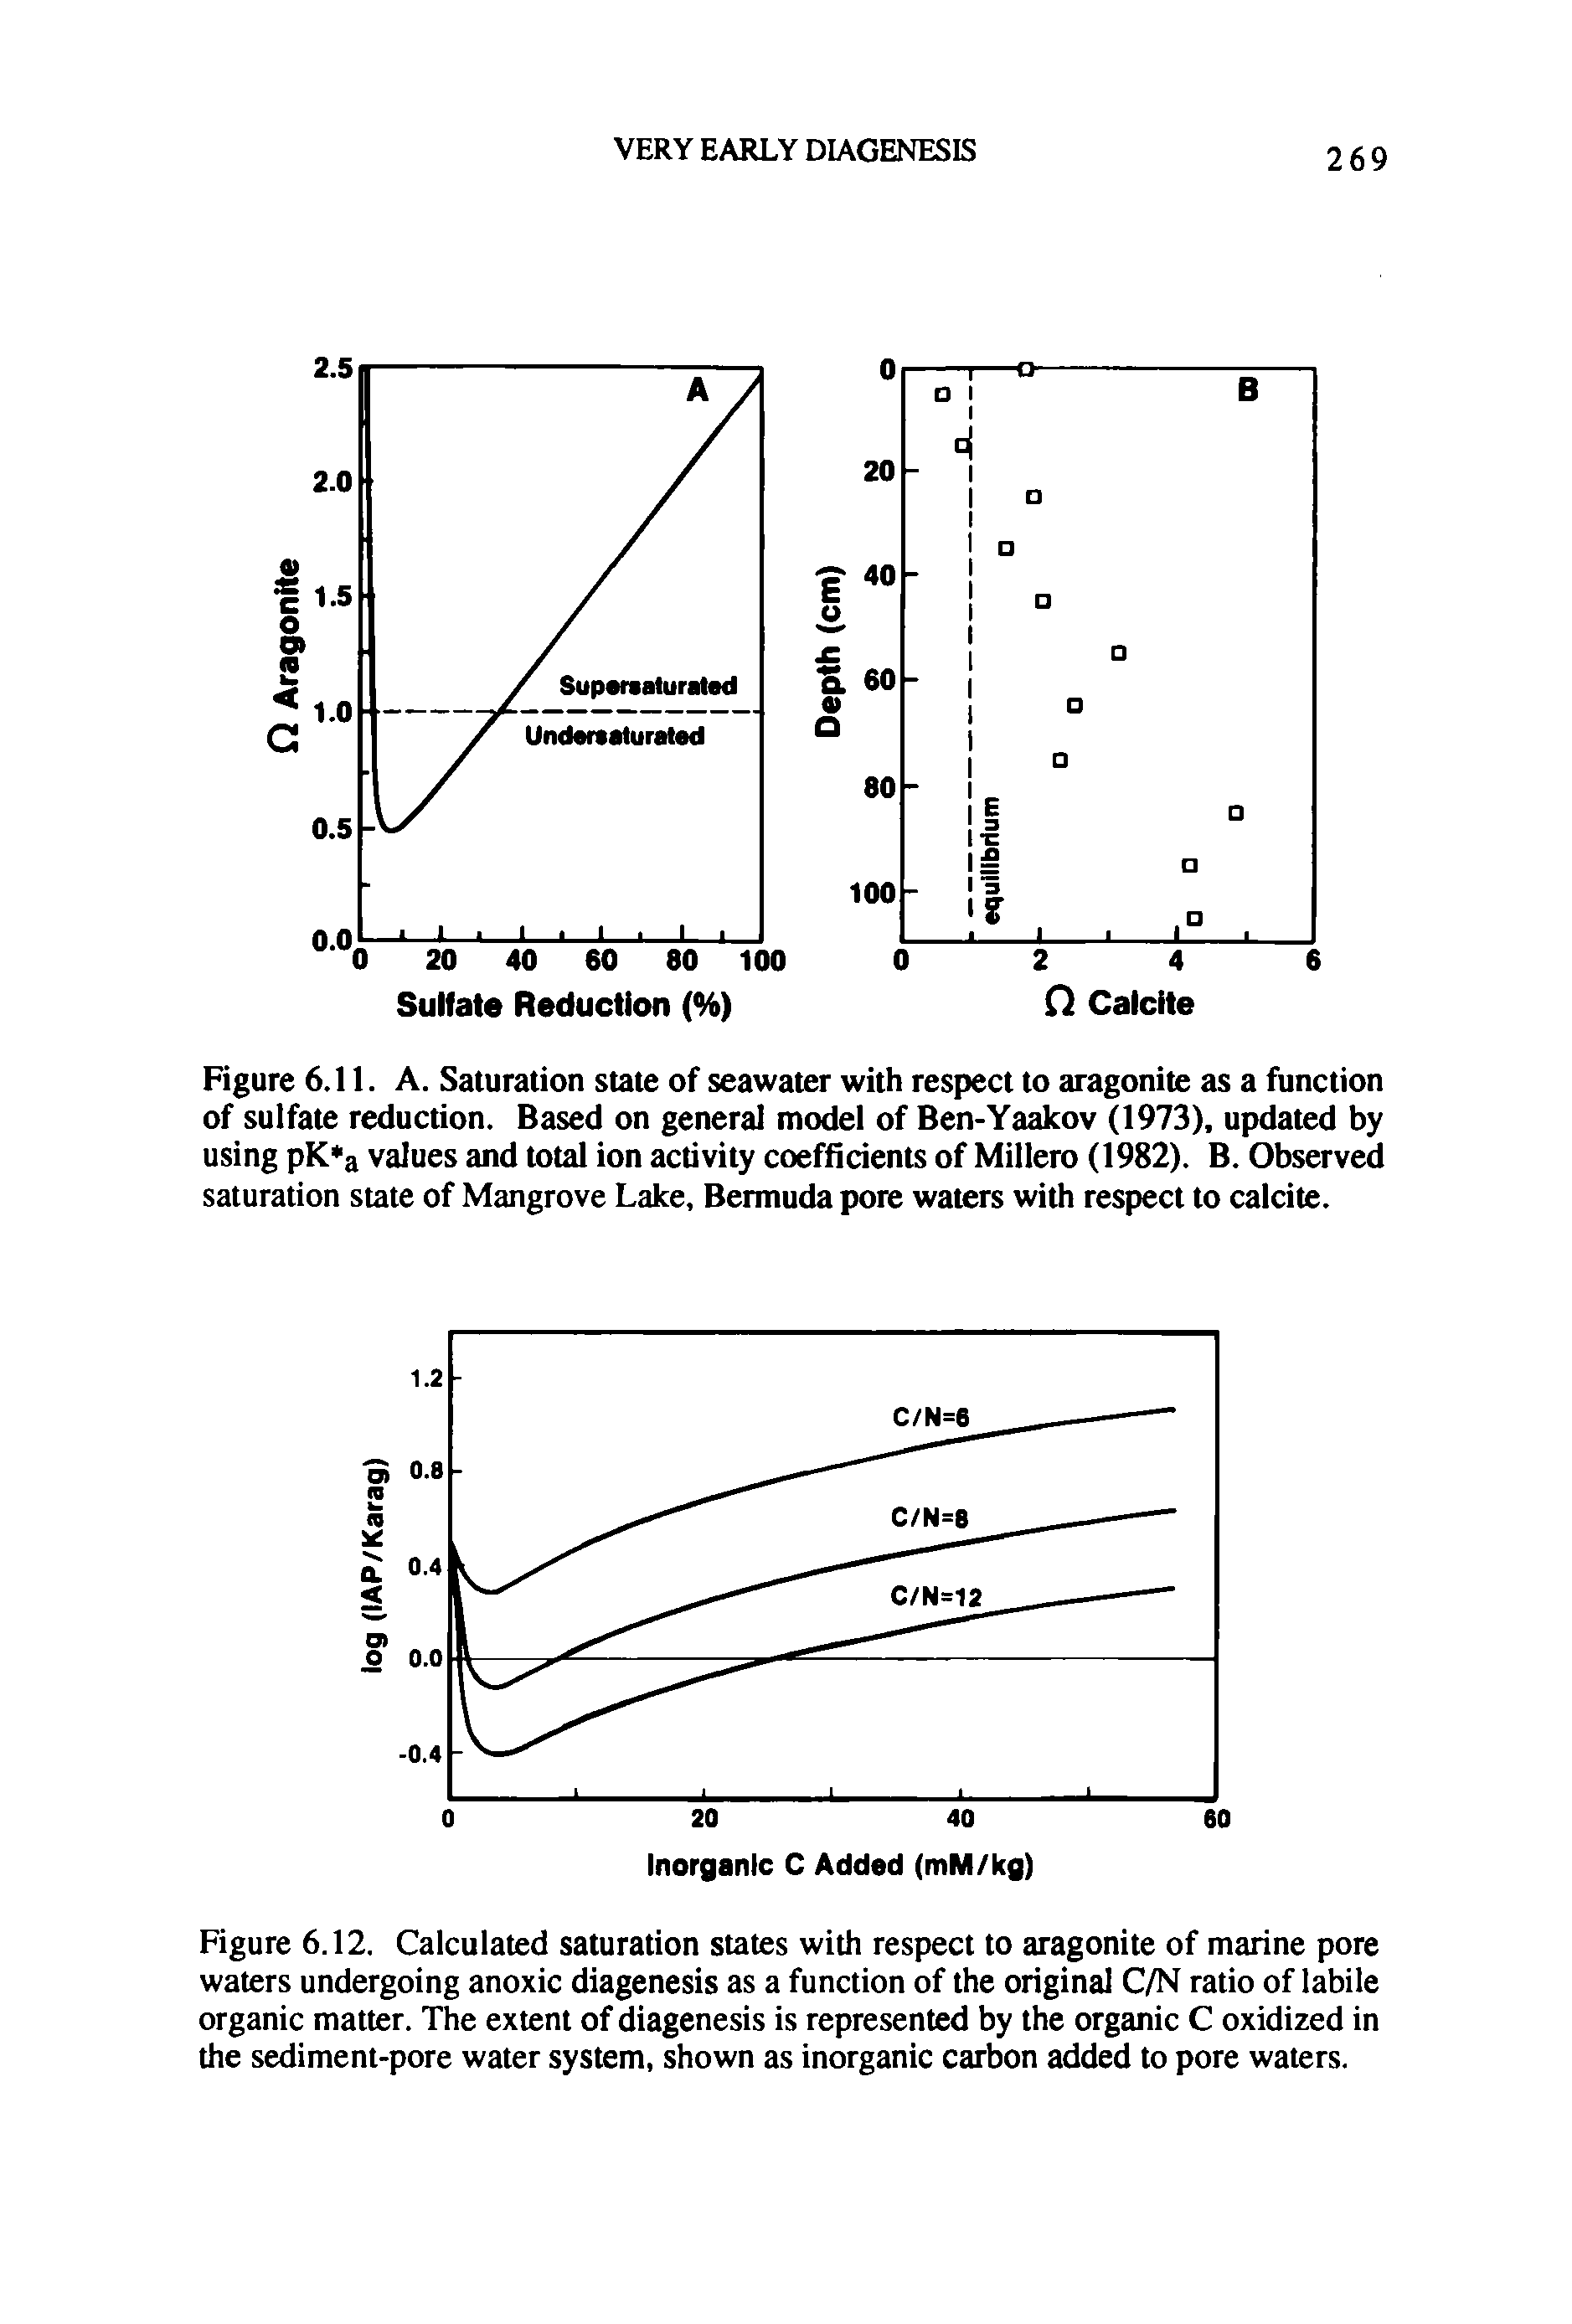 Figure 6.12. Calculated saturation states with respect to aragonite of marine pore waters undergoing anoxic diagenesis as a function of the original C/N ratio of labile organic matter. The extent of diagenesis is represented by the organic C oxidized in the sediment-pore water system, shown as inorganic carbon added to pore waters.